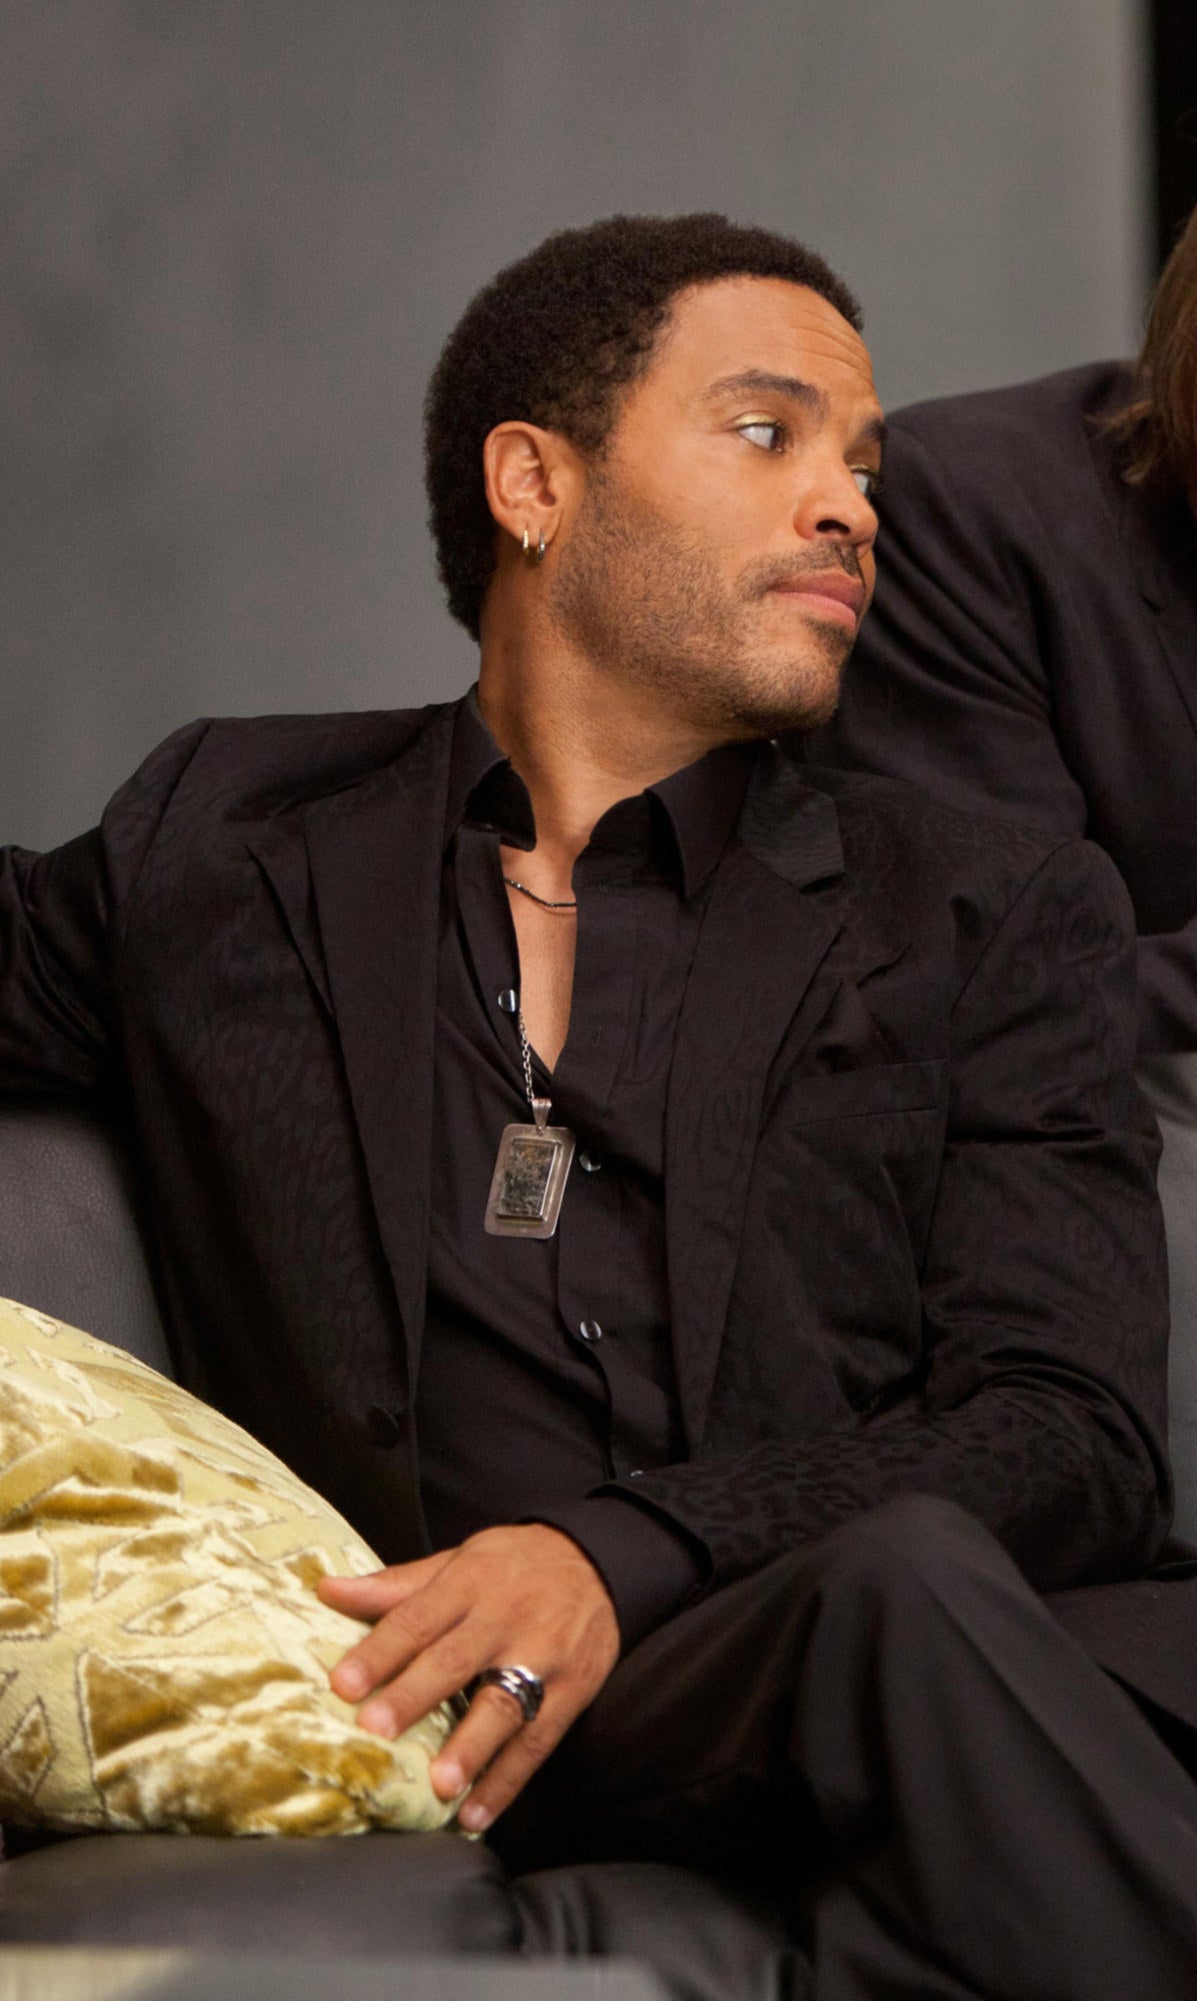 Cinna in a black suit with silver jewelry